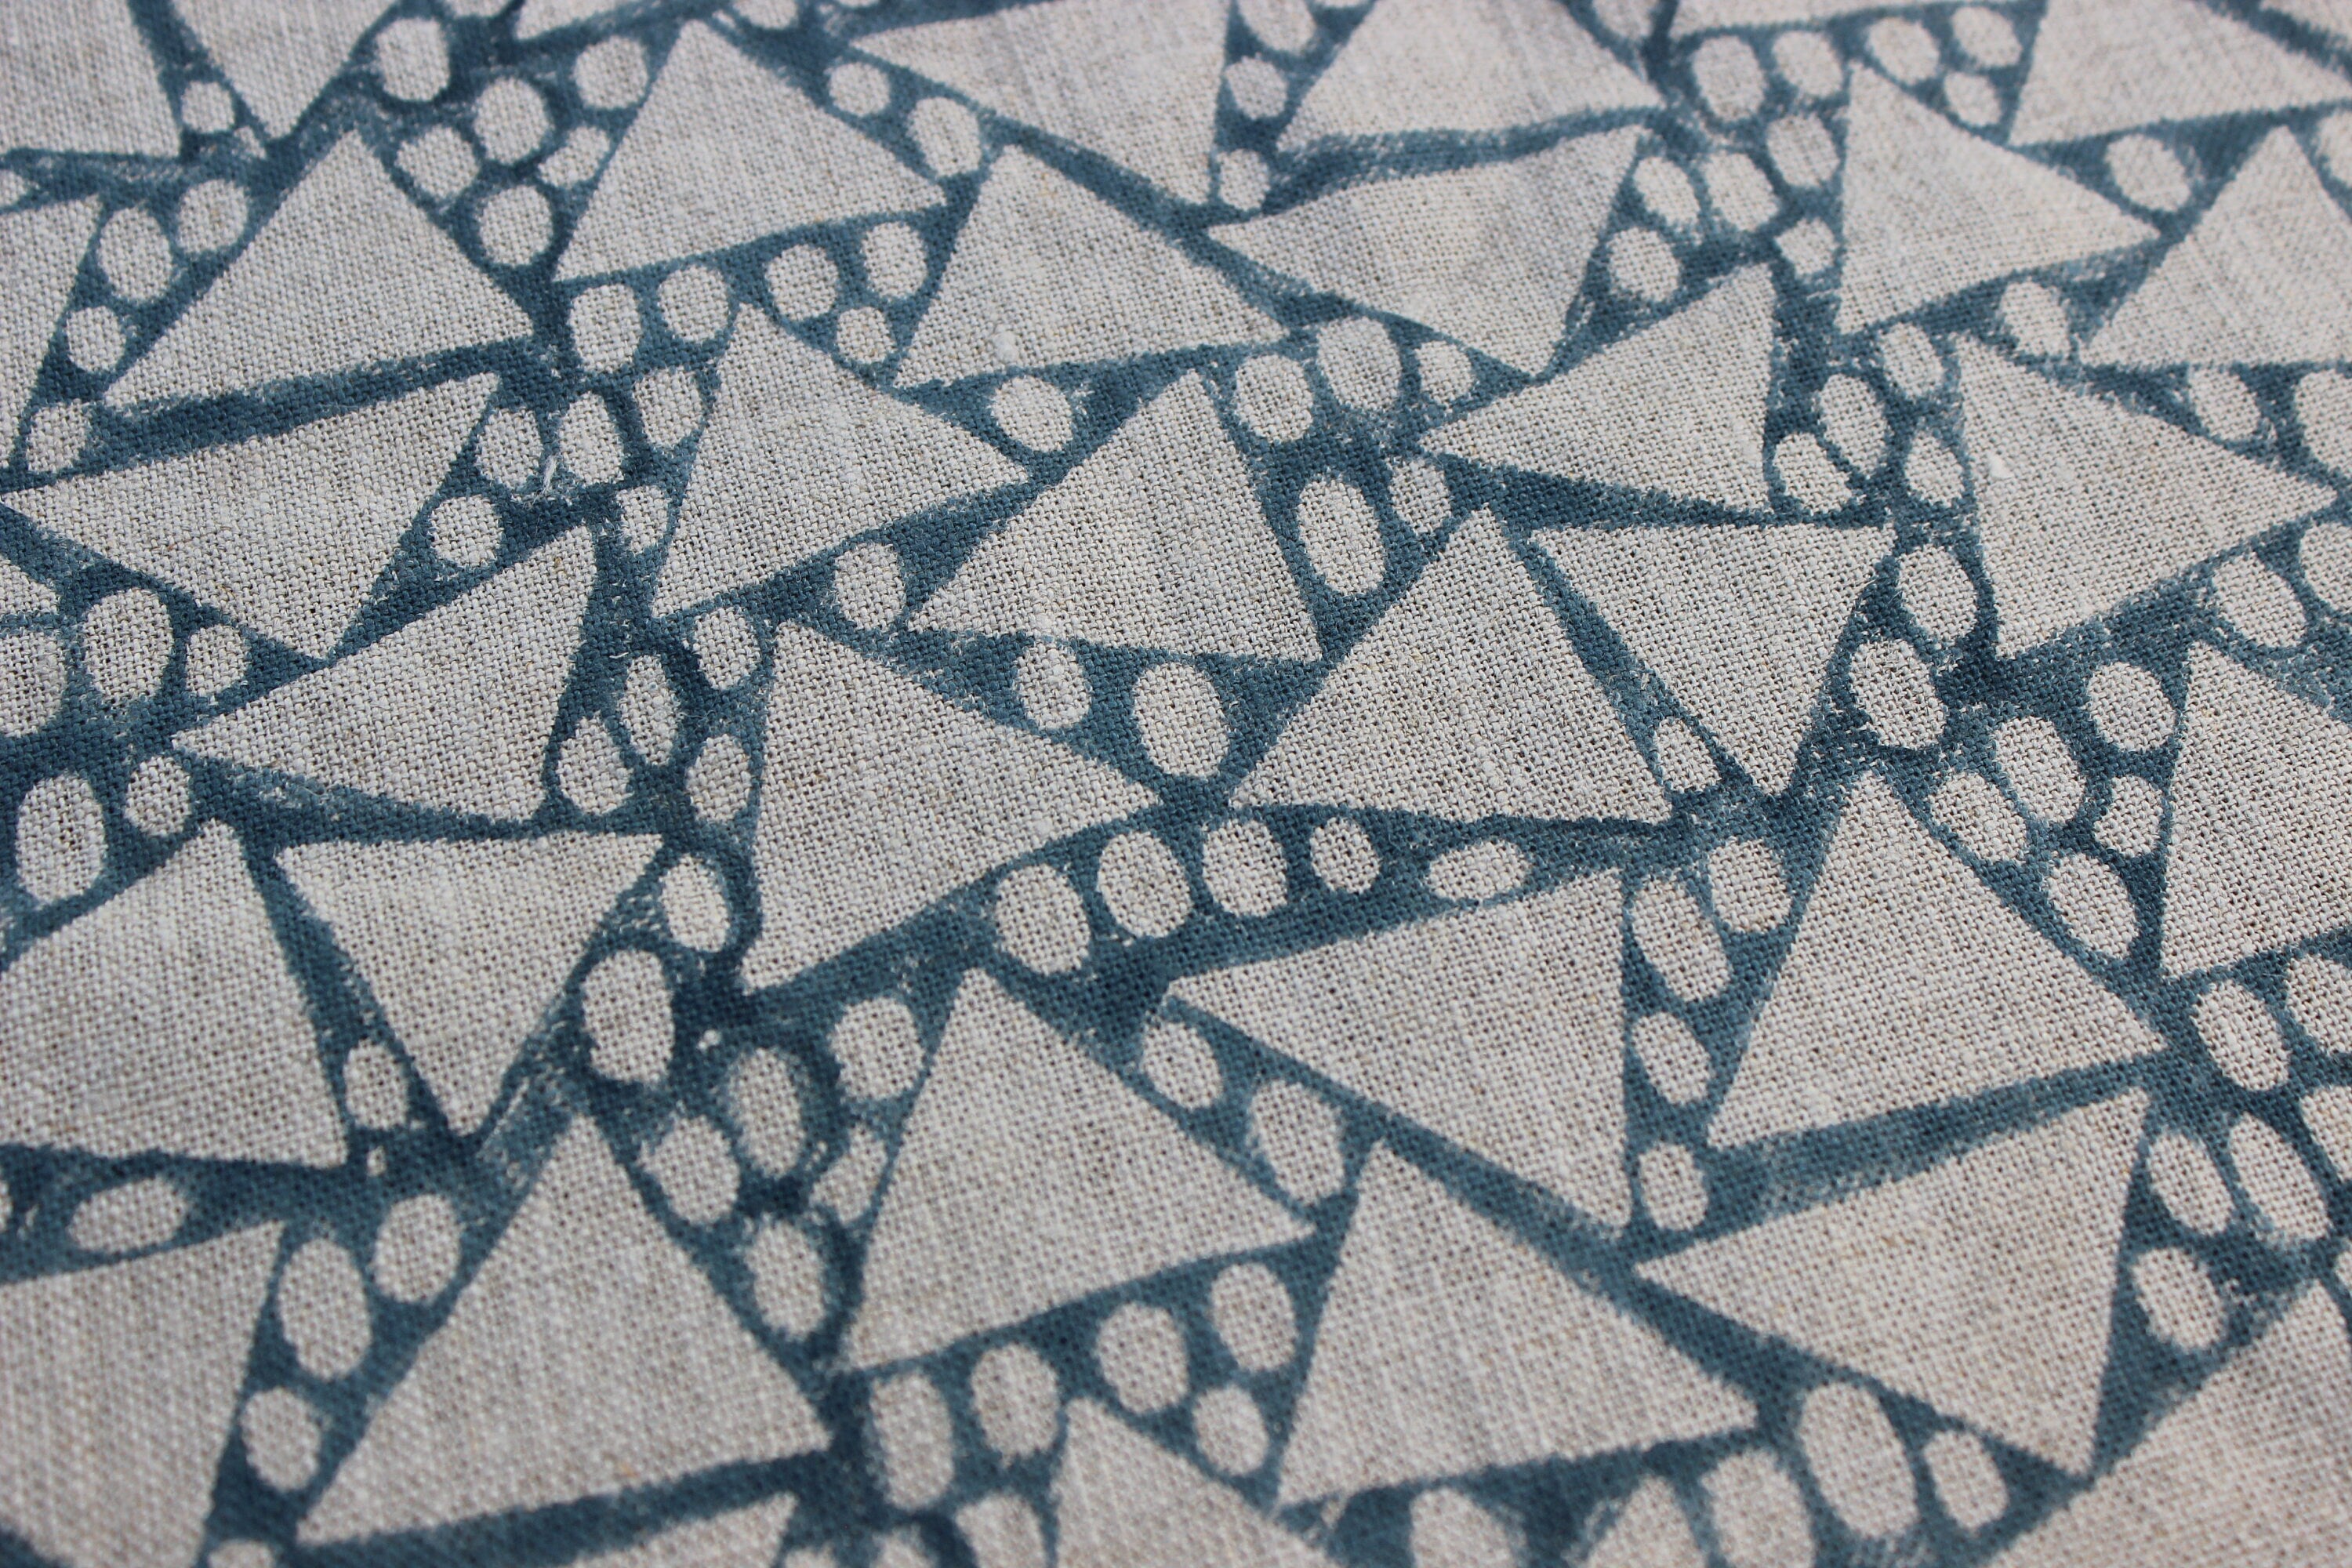 Block Print Linen Fabric, Triangle Zoom  Block Print Fabric, Triangle & Dot Pattern, Natural Linen Cloth, Block Print Textile, Sewing  Upholstery Material